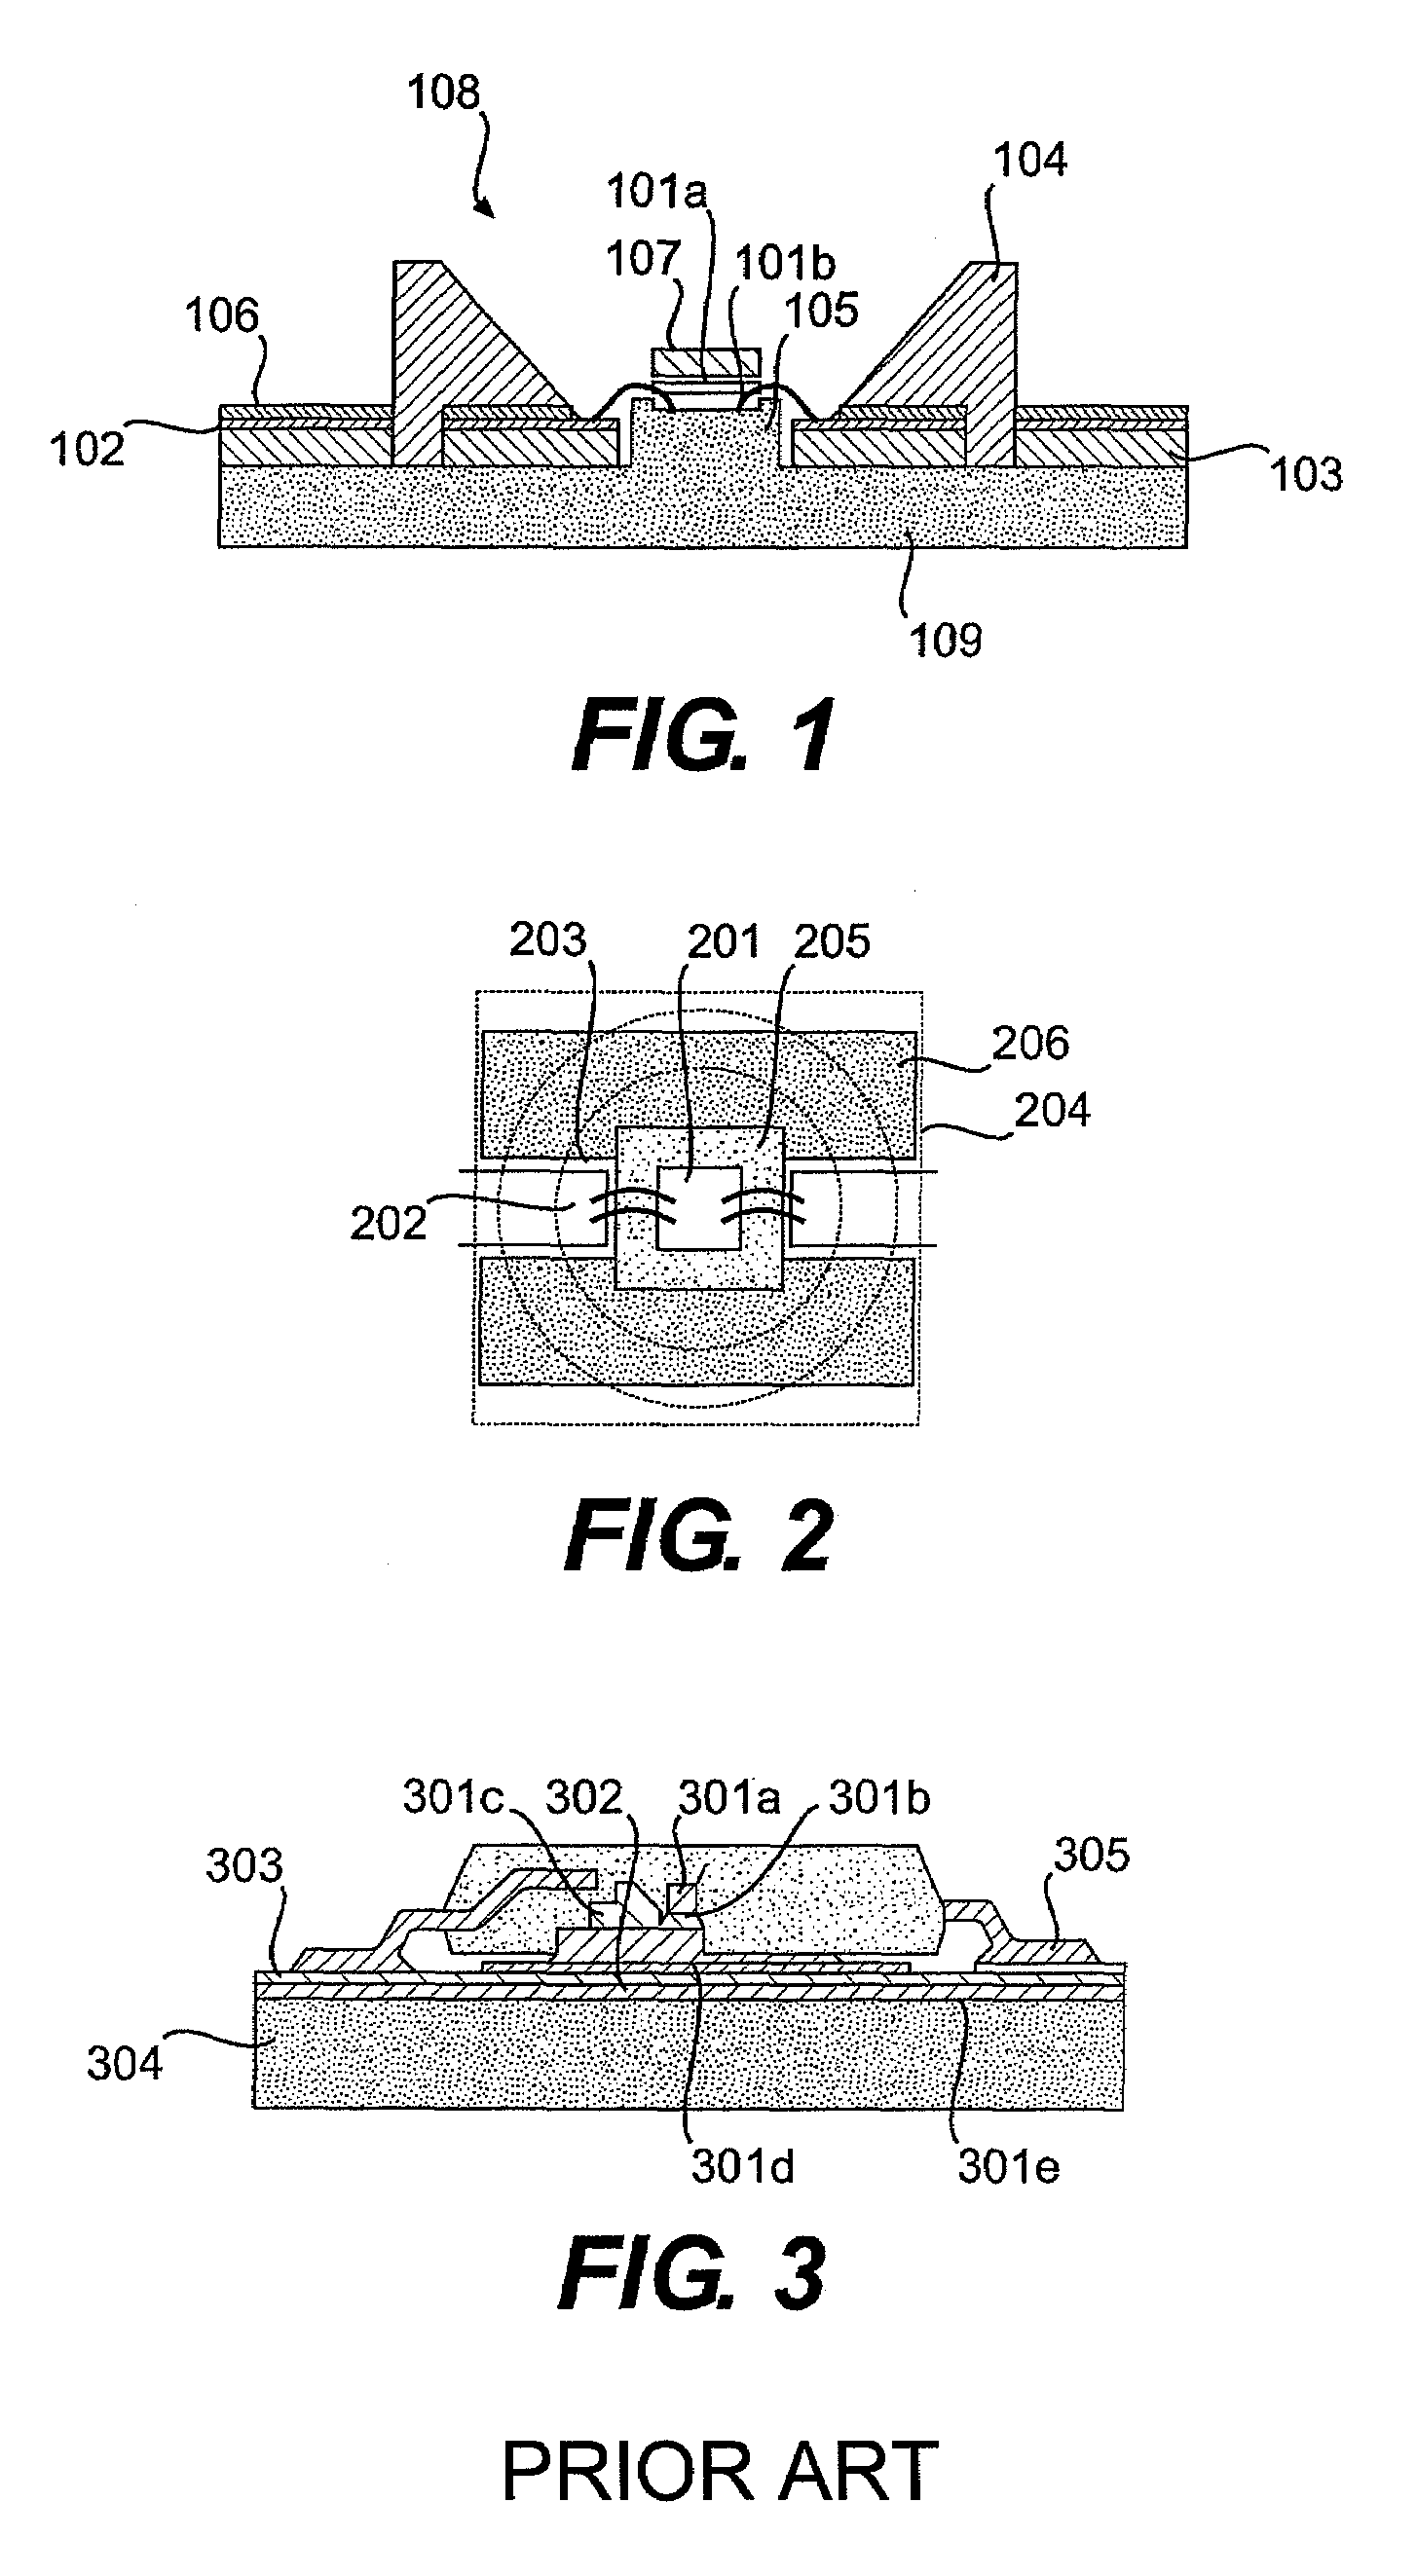 High power light-emitting diode package comprising substrate having beacon